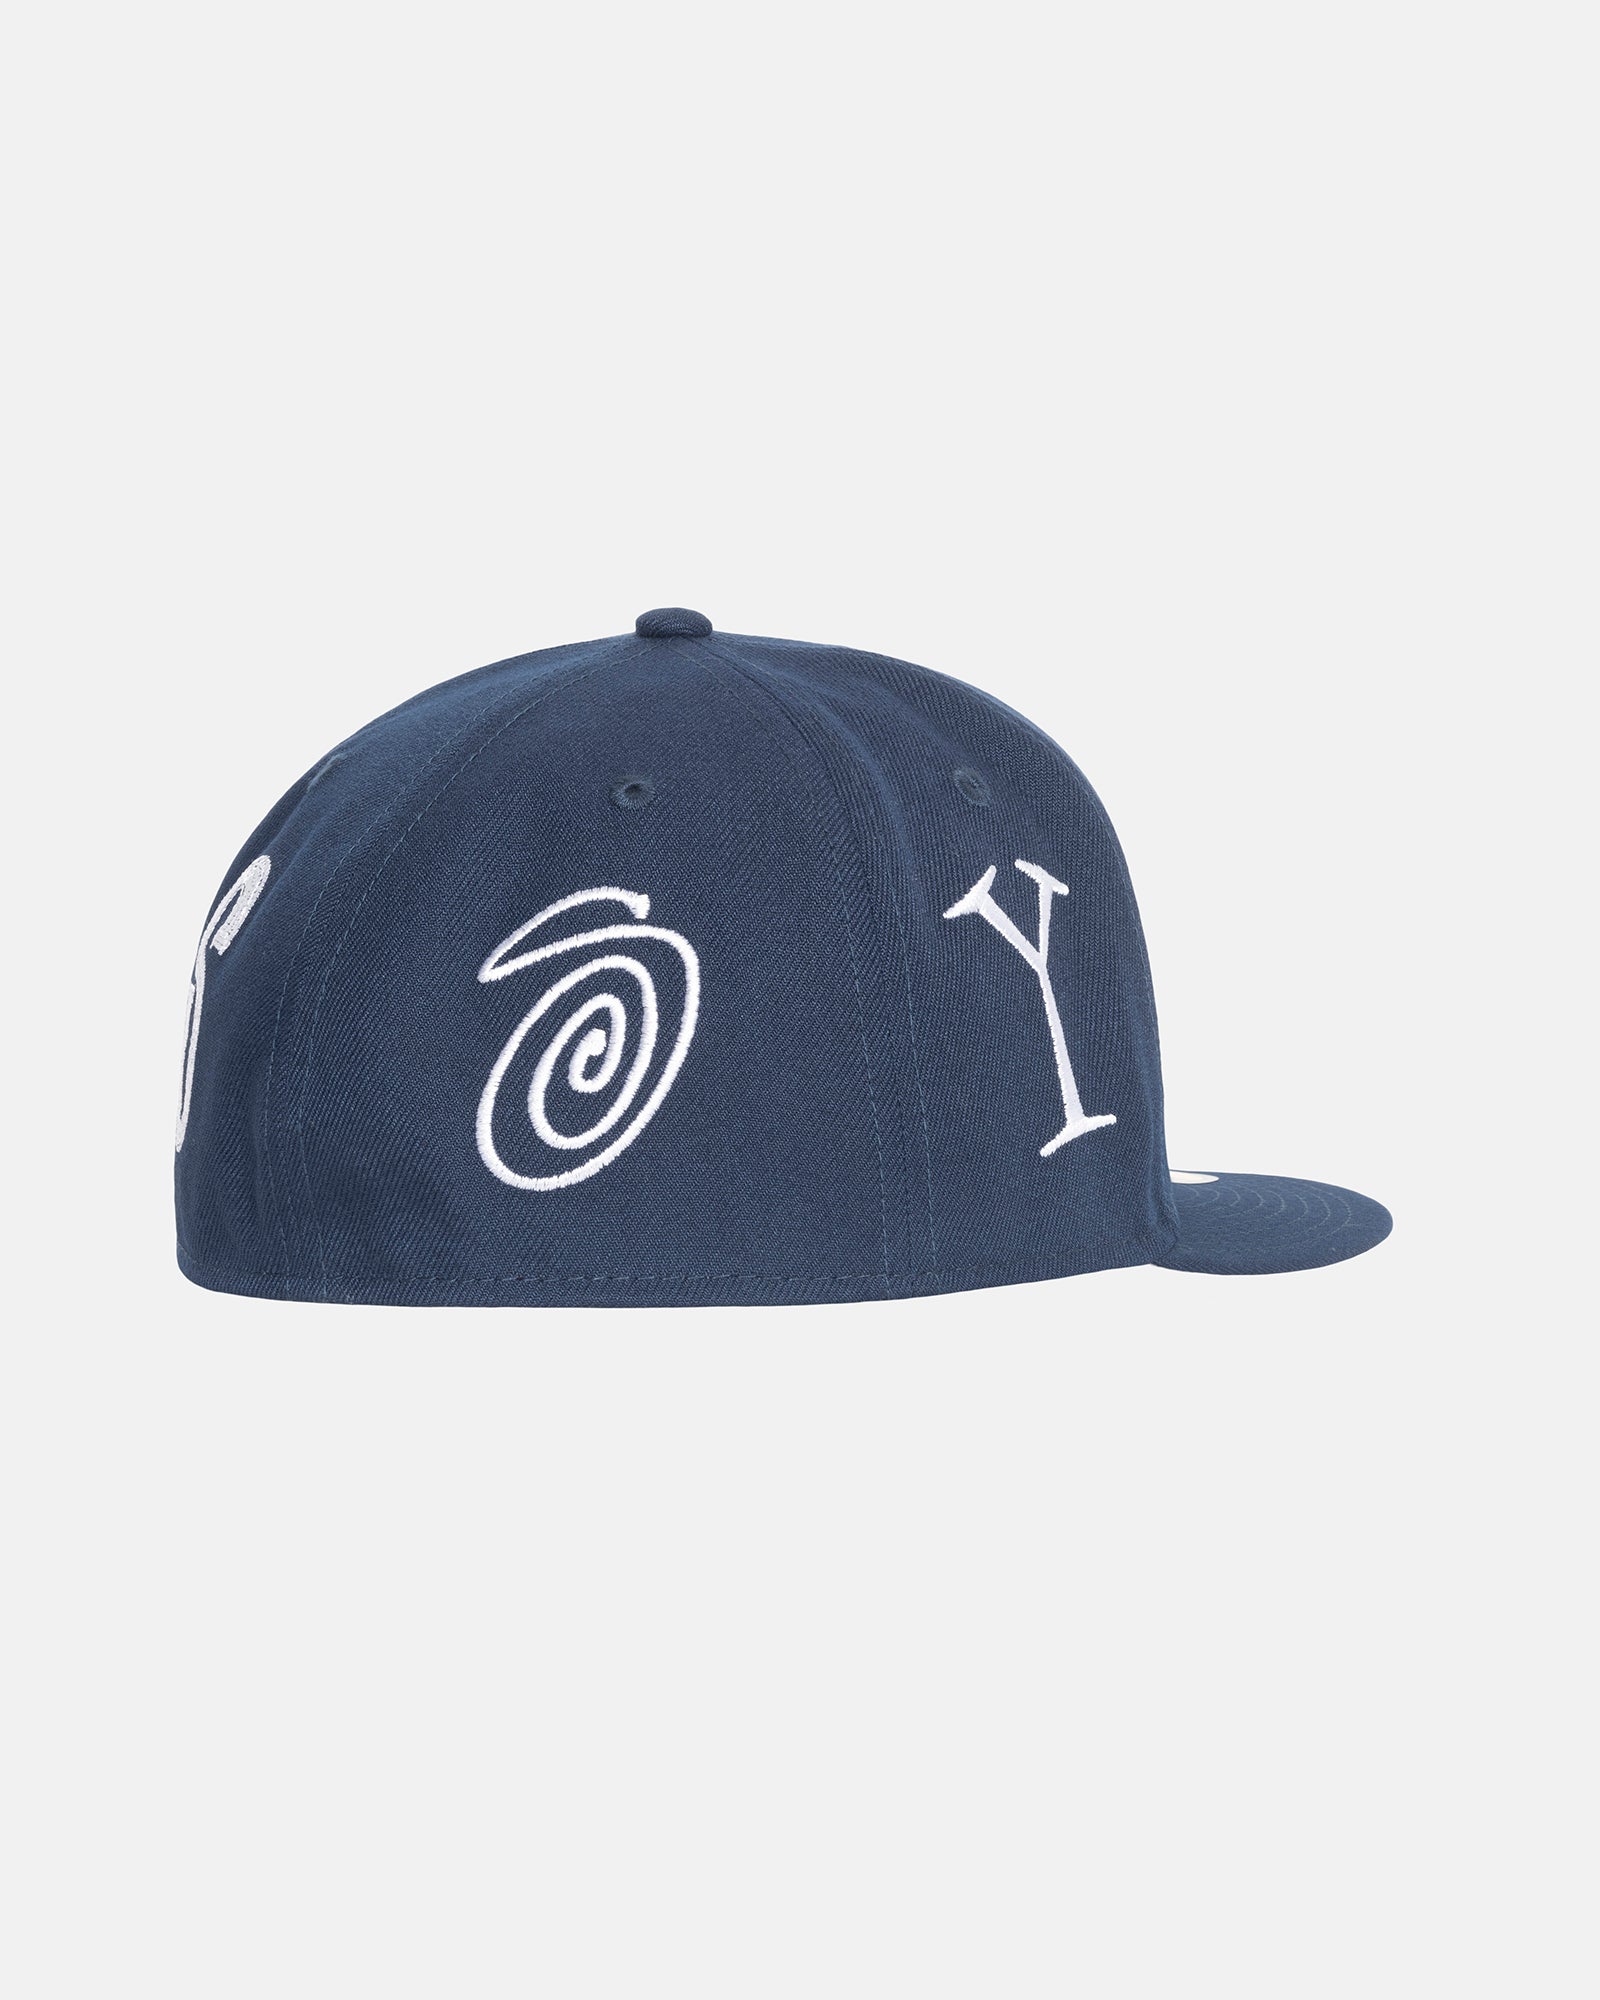 NEW ERA 59FIFTY RANSOM EMBROIDERED NAVY HEADWEAR